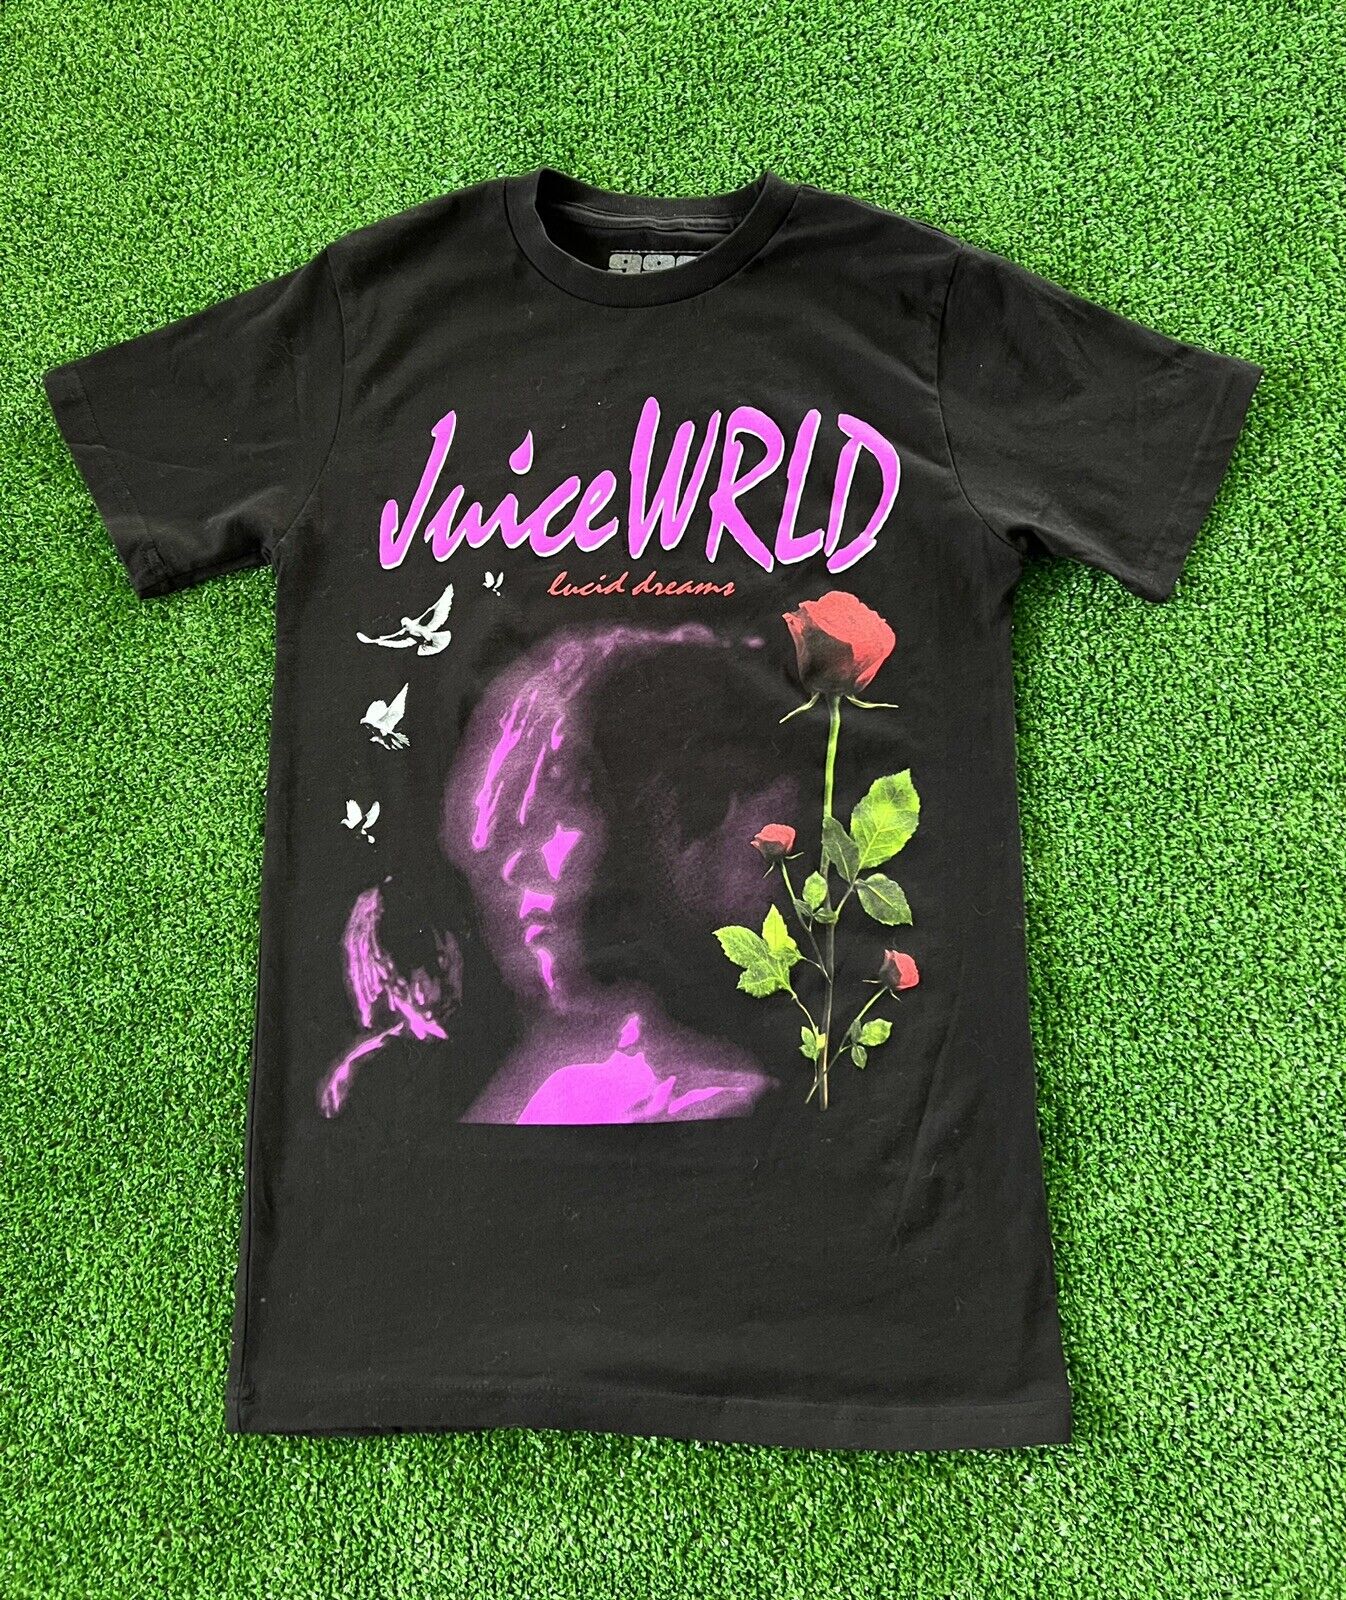 Get Authentic Juice Wrld Merch at Our Online Store